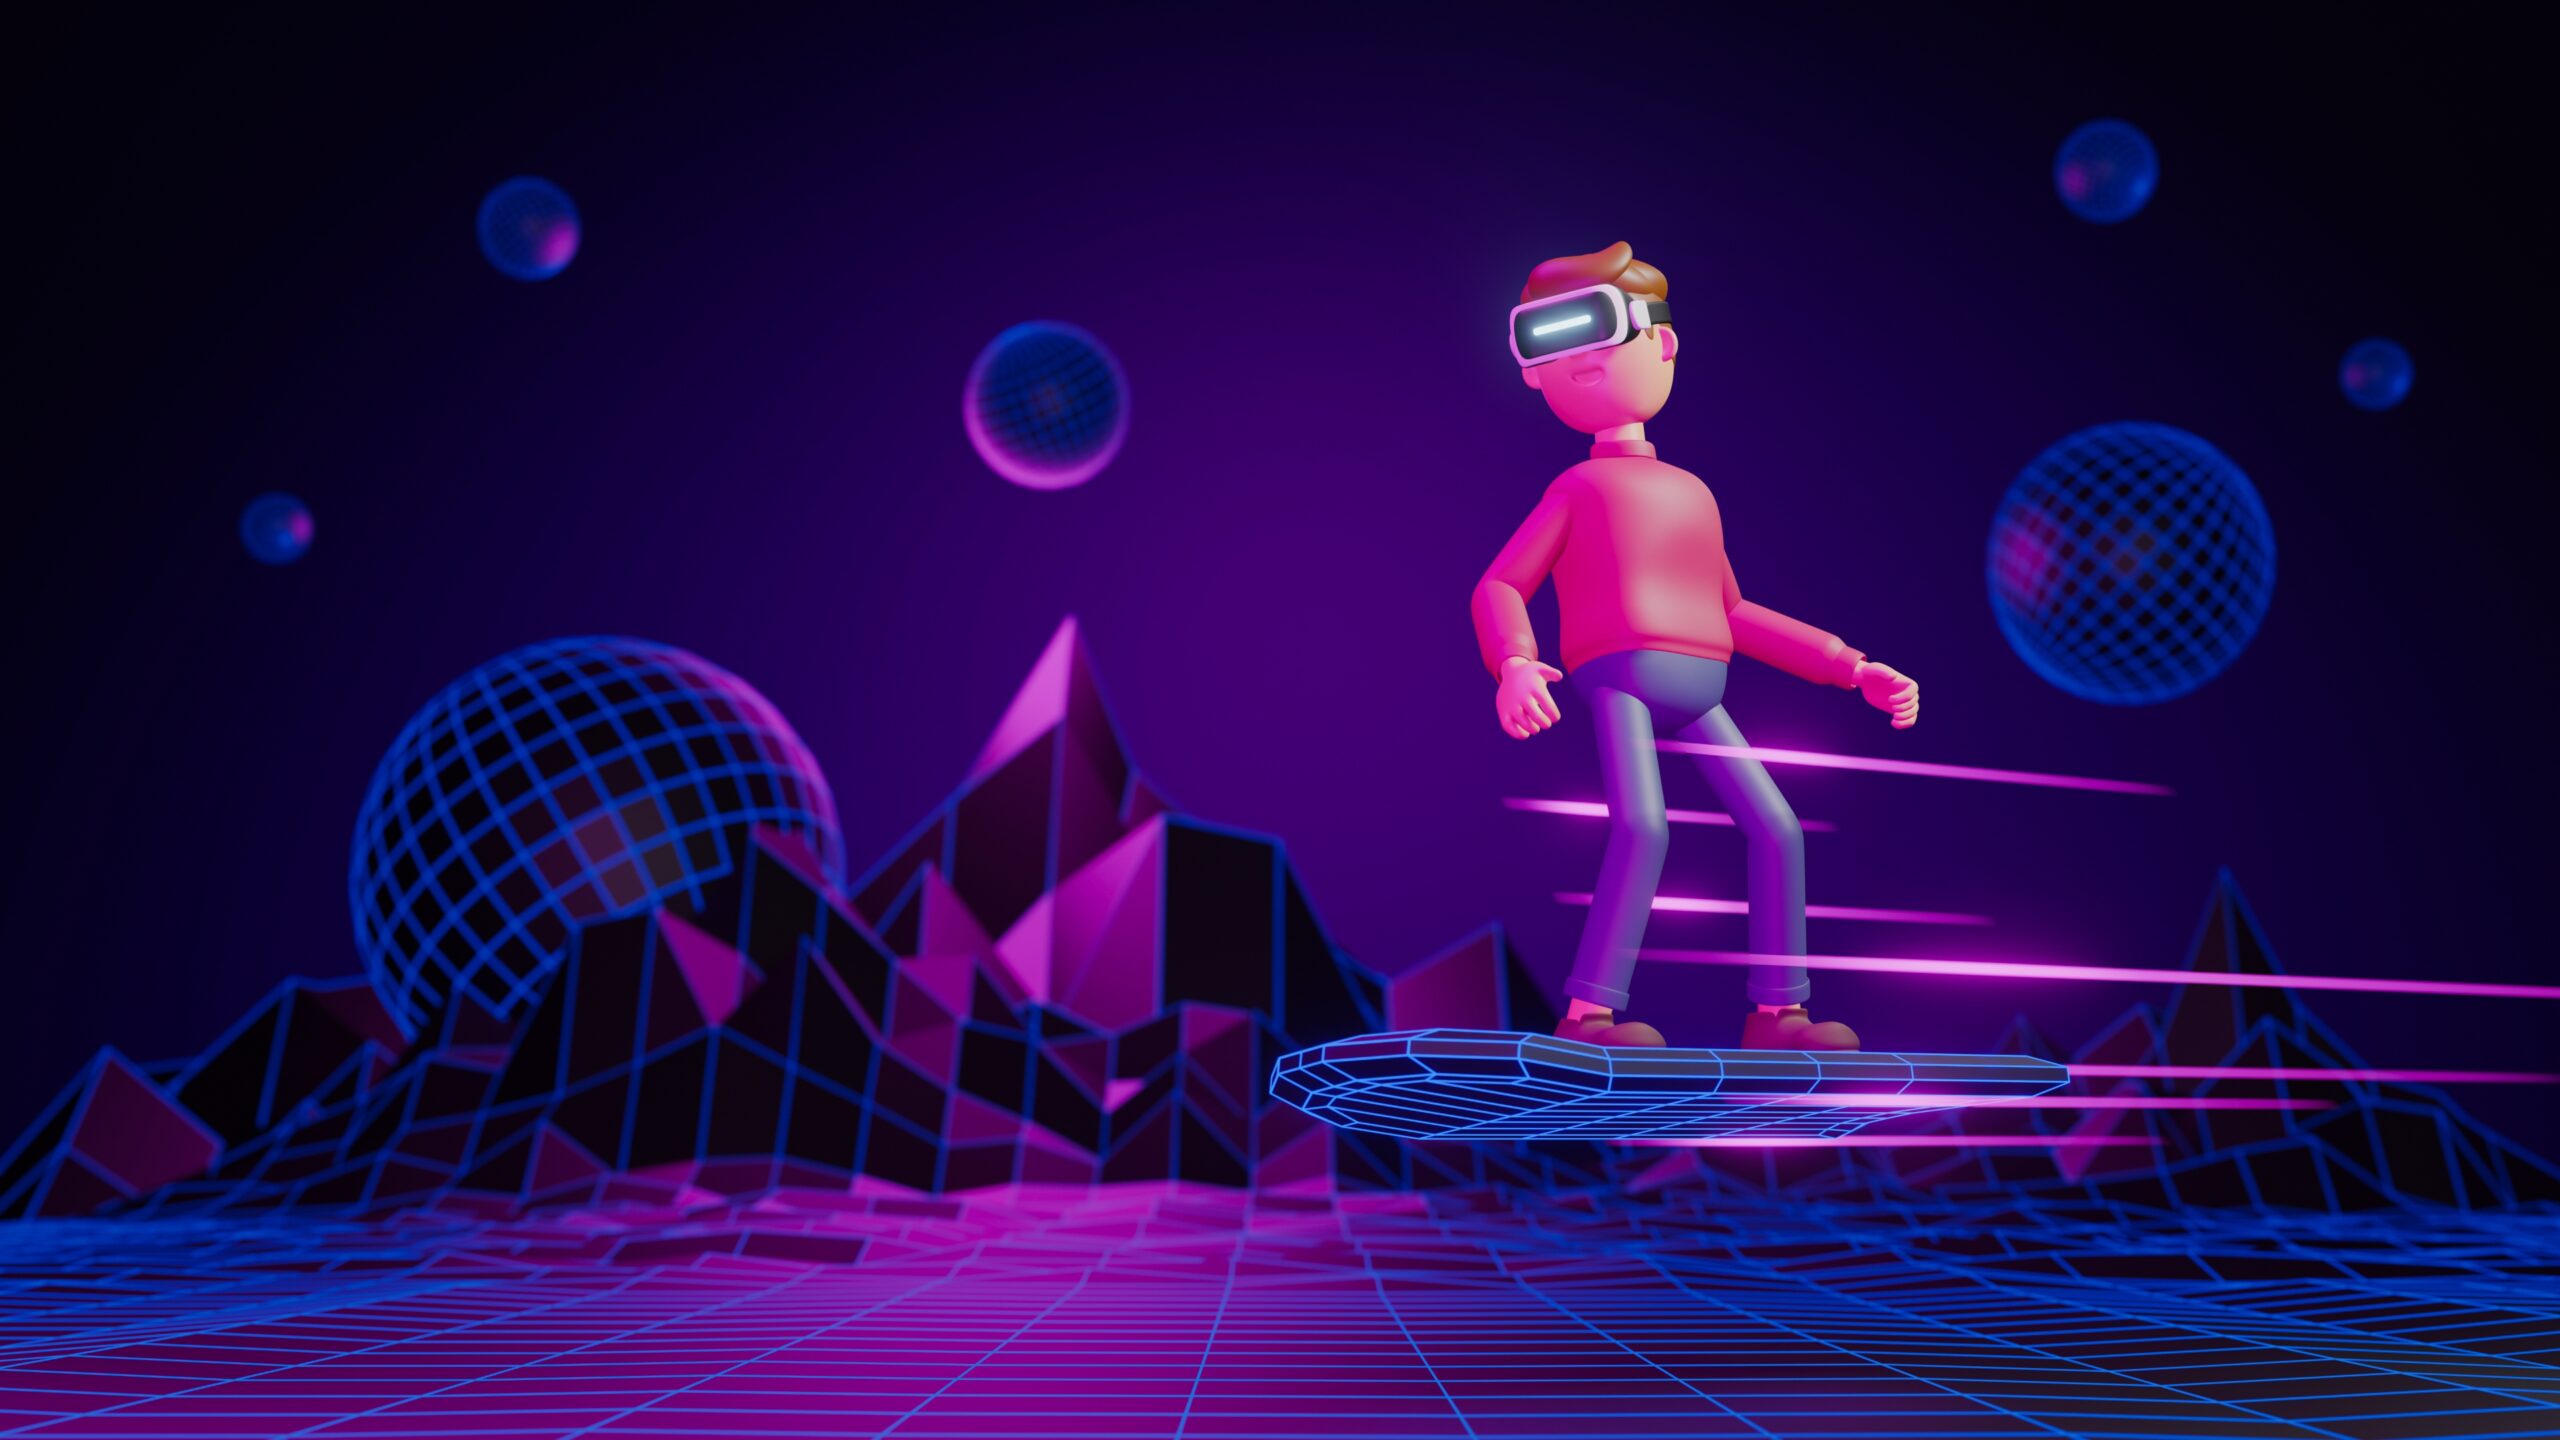 Is Your Business Ready for the Metaverse? Here are 3 Things to Consider